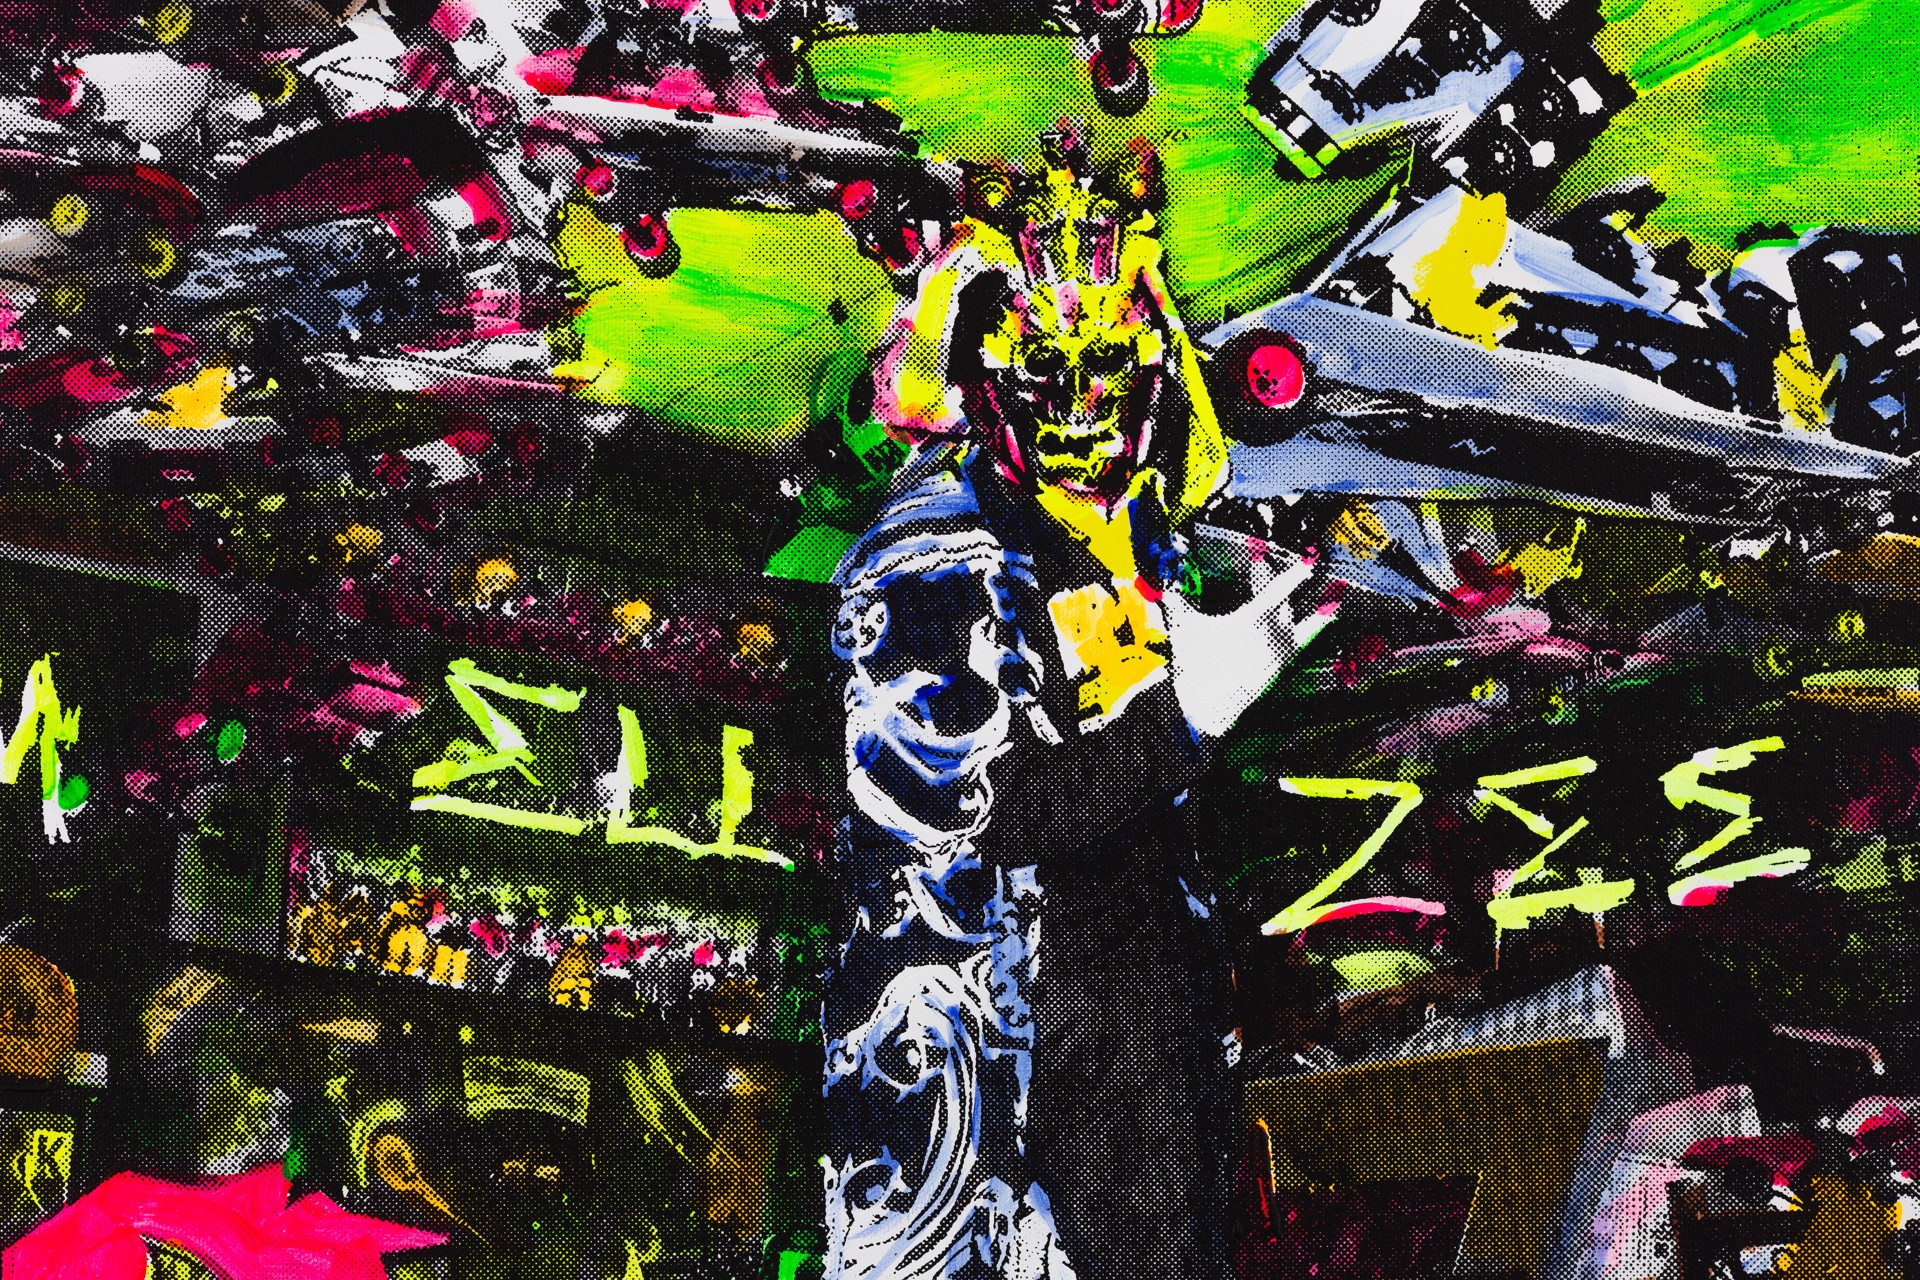 Rammellzee, The Battle Station by Charlie Ahearn